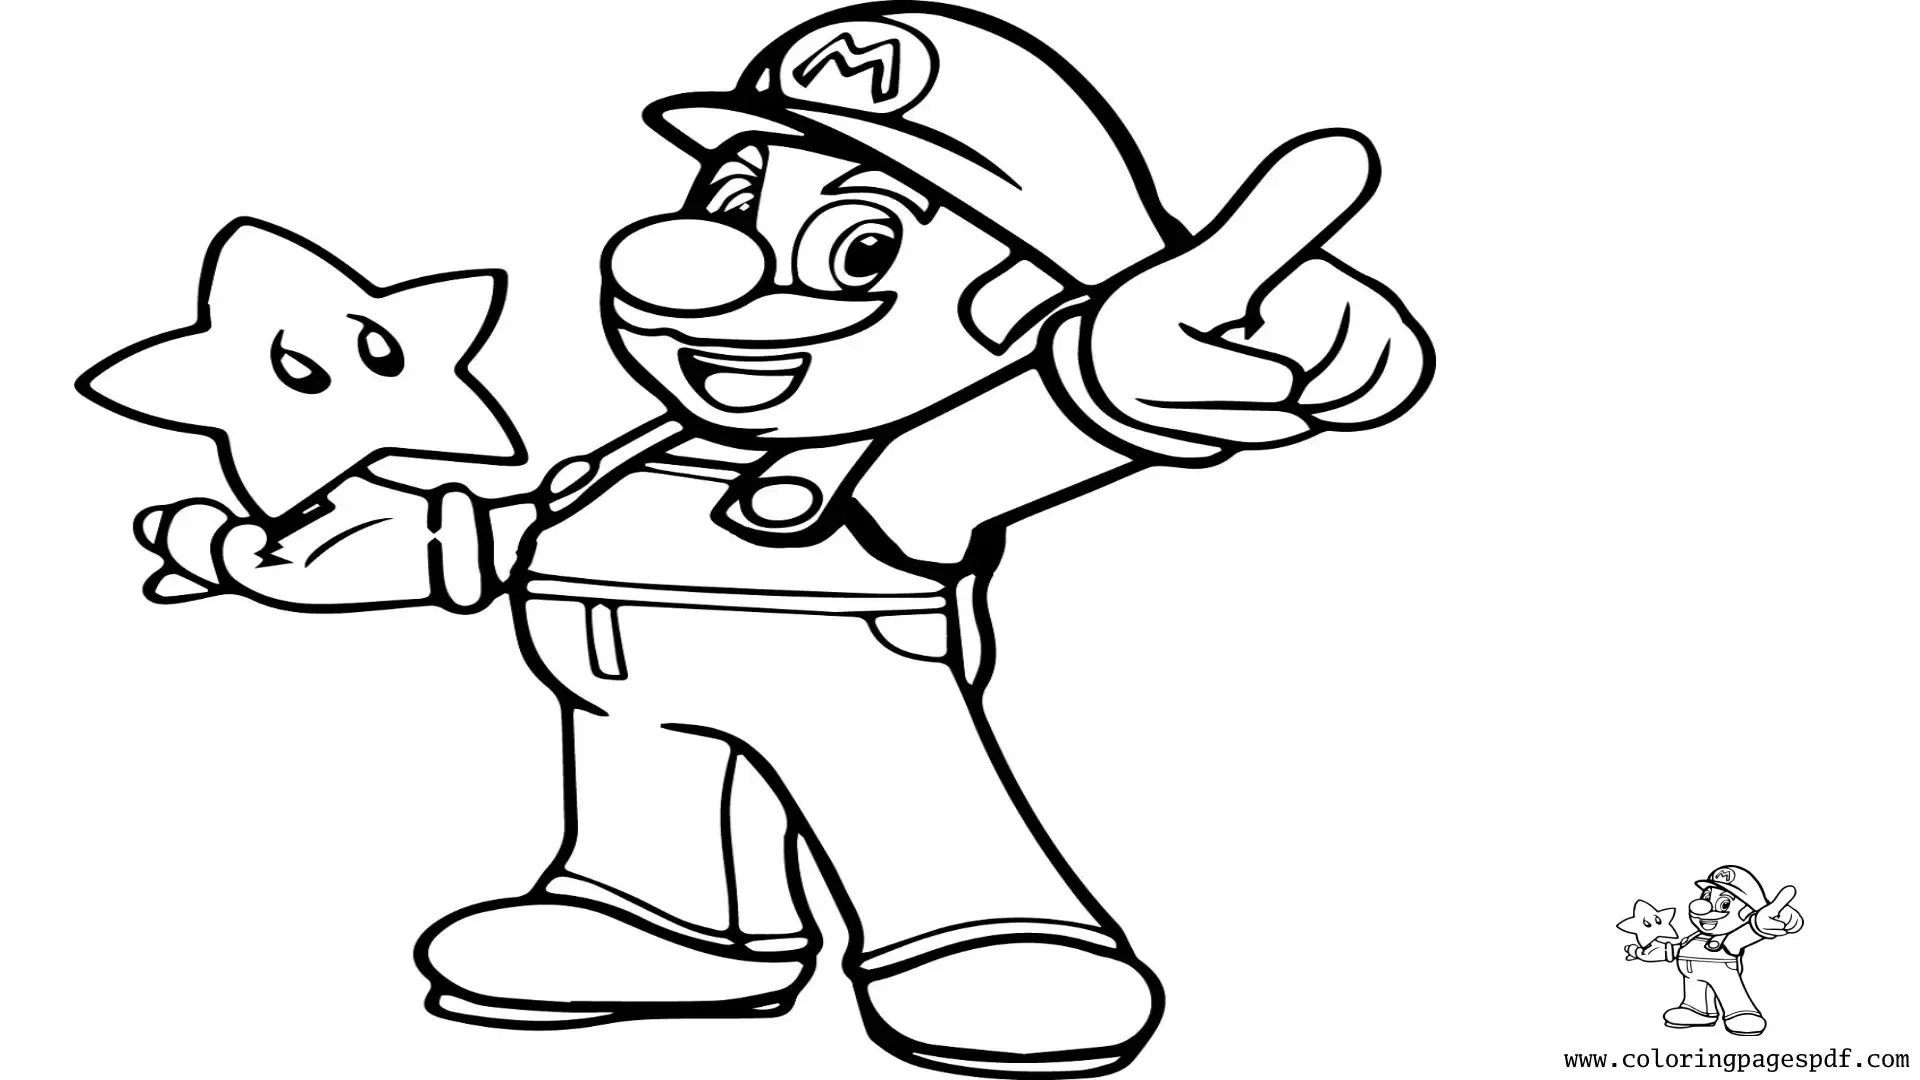 Coloring Page Of Mario Holding A Star